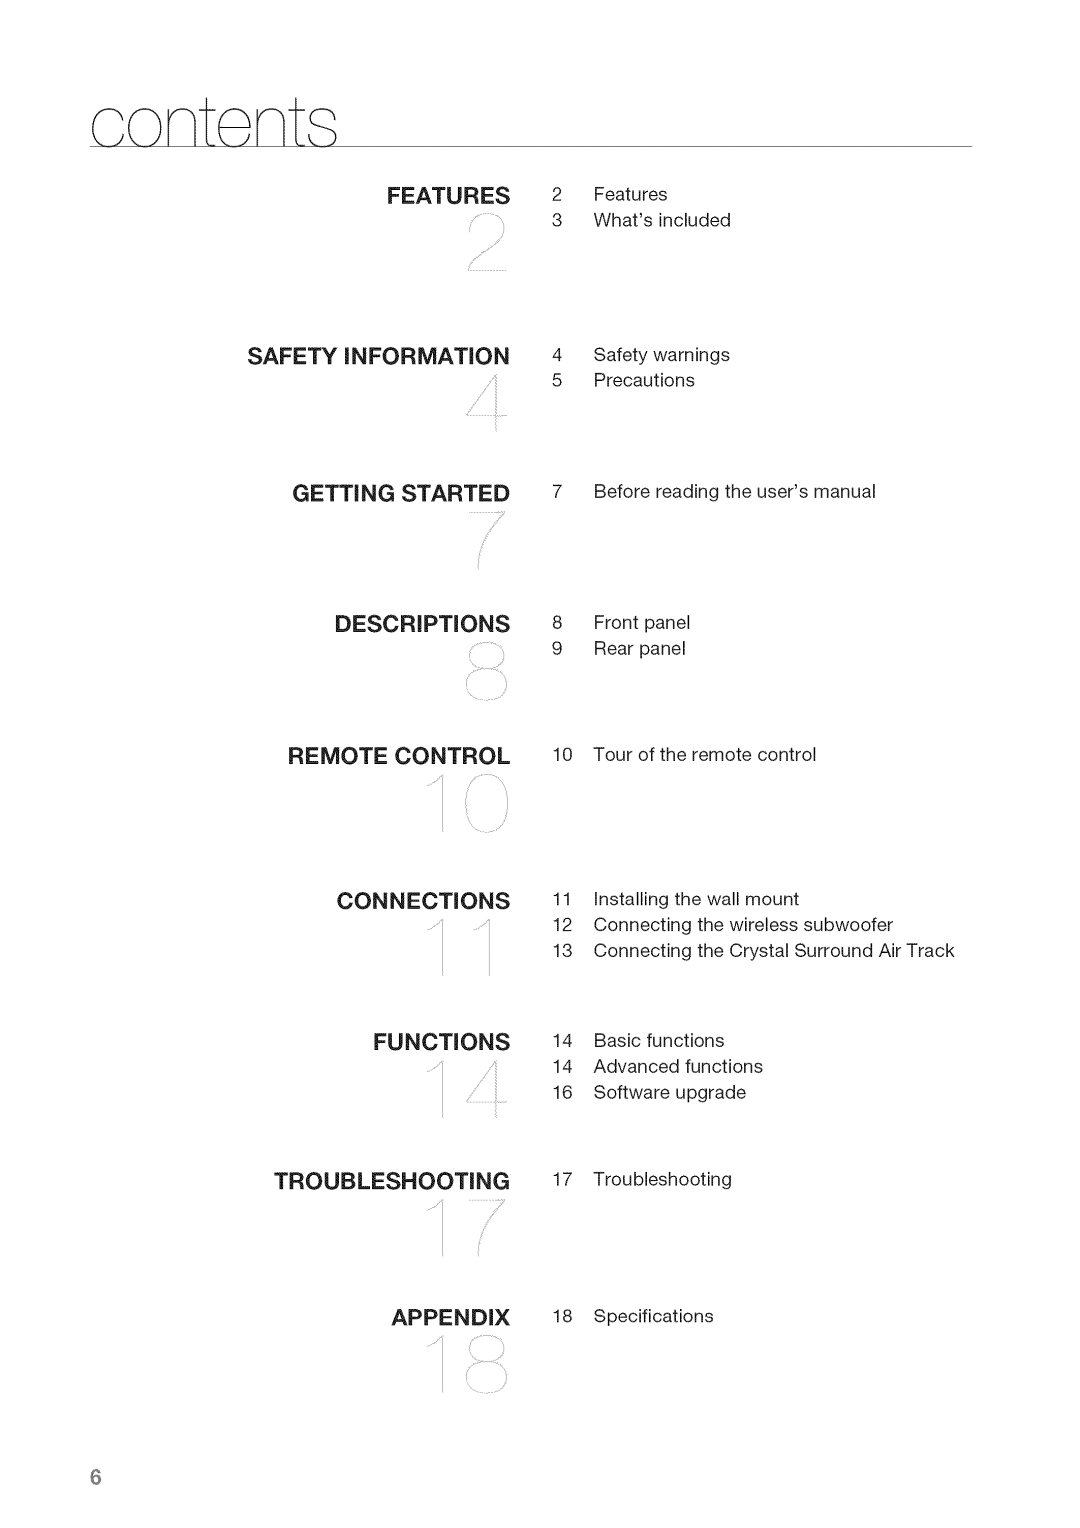 Samsung HW-C450 manual content, Features, Safety Information, Getting, Started, DESCRiPTiONS, Remote, Control, Connections 